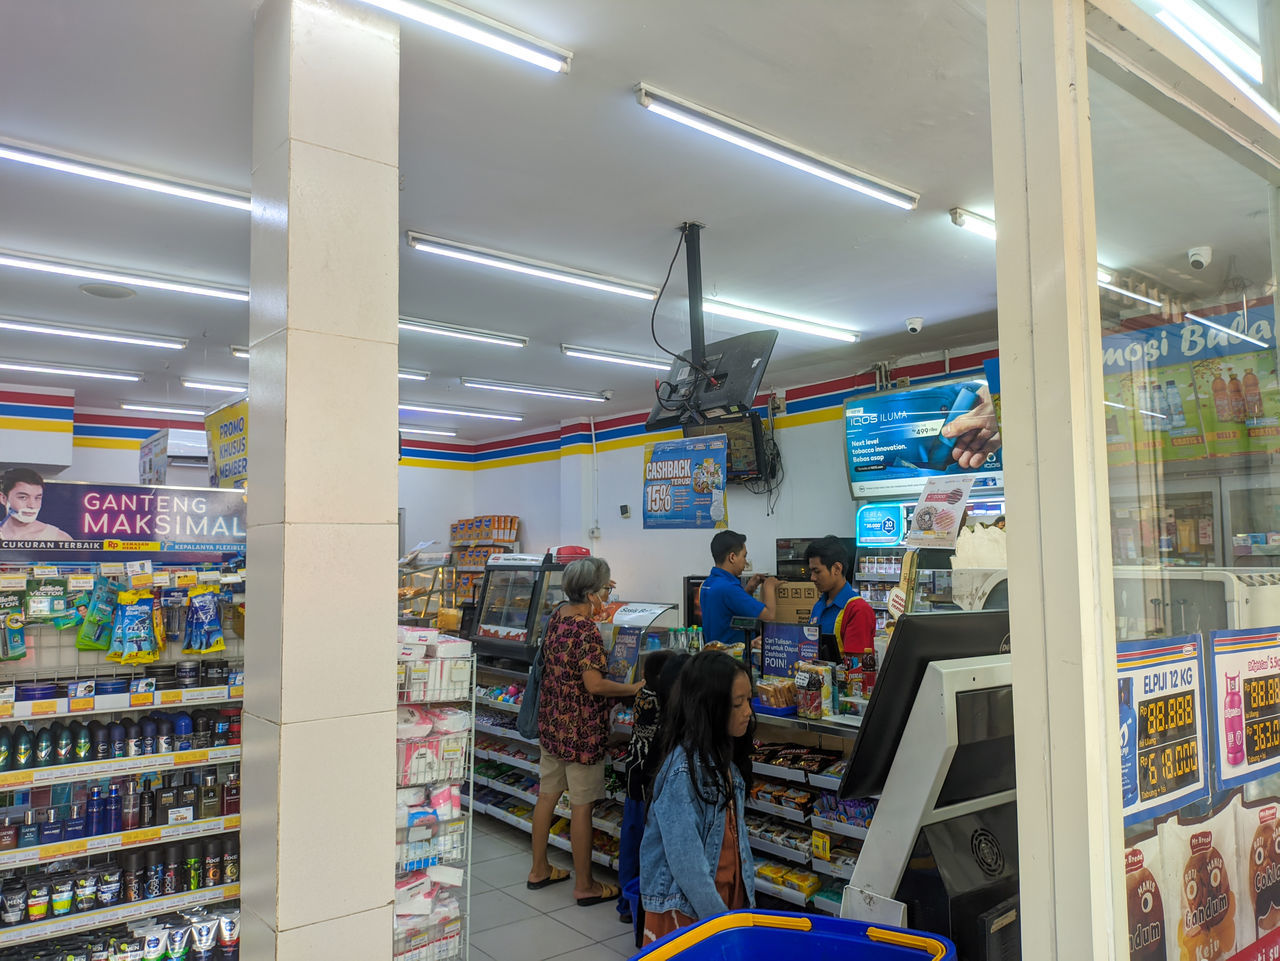 convenience store, retail, supermarket, business, adult, business finance and industry, indoors, building, men, occupation, store, working, communication, technology, women, group of people, shopping, looking, customer, standing